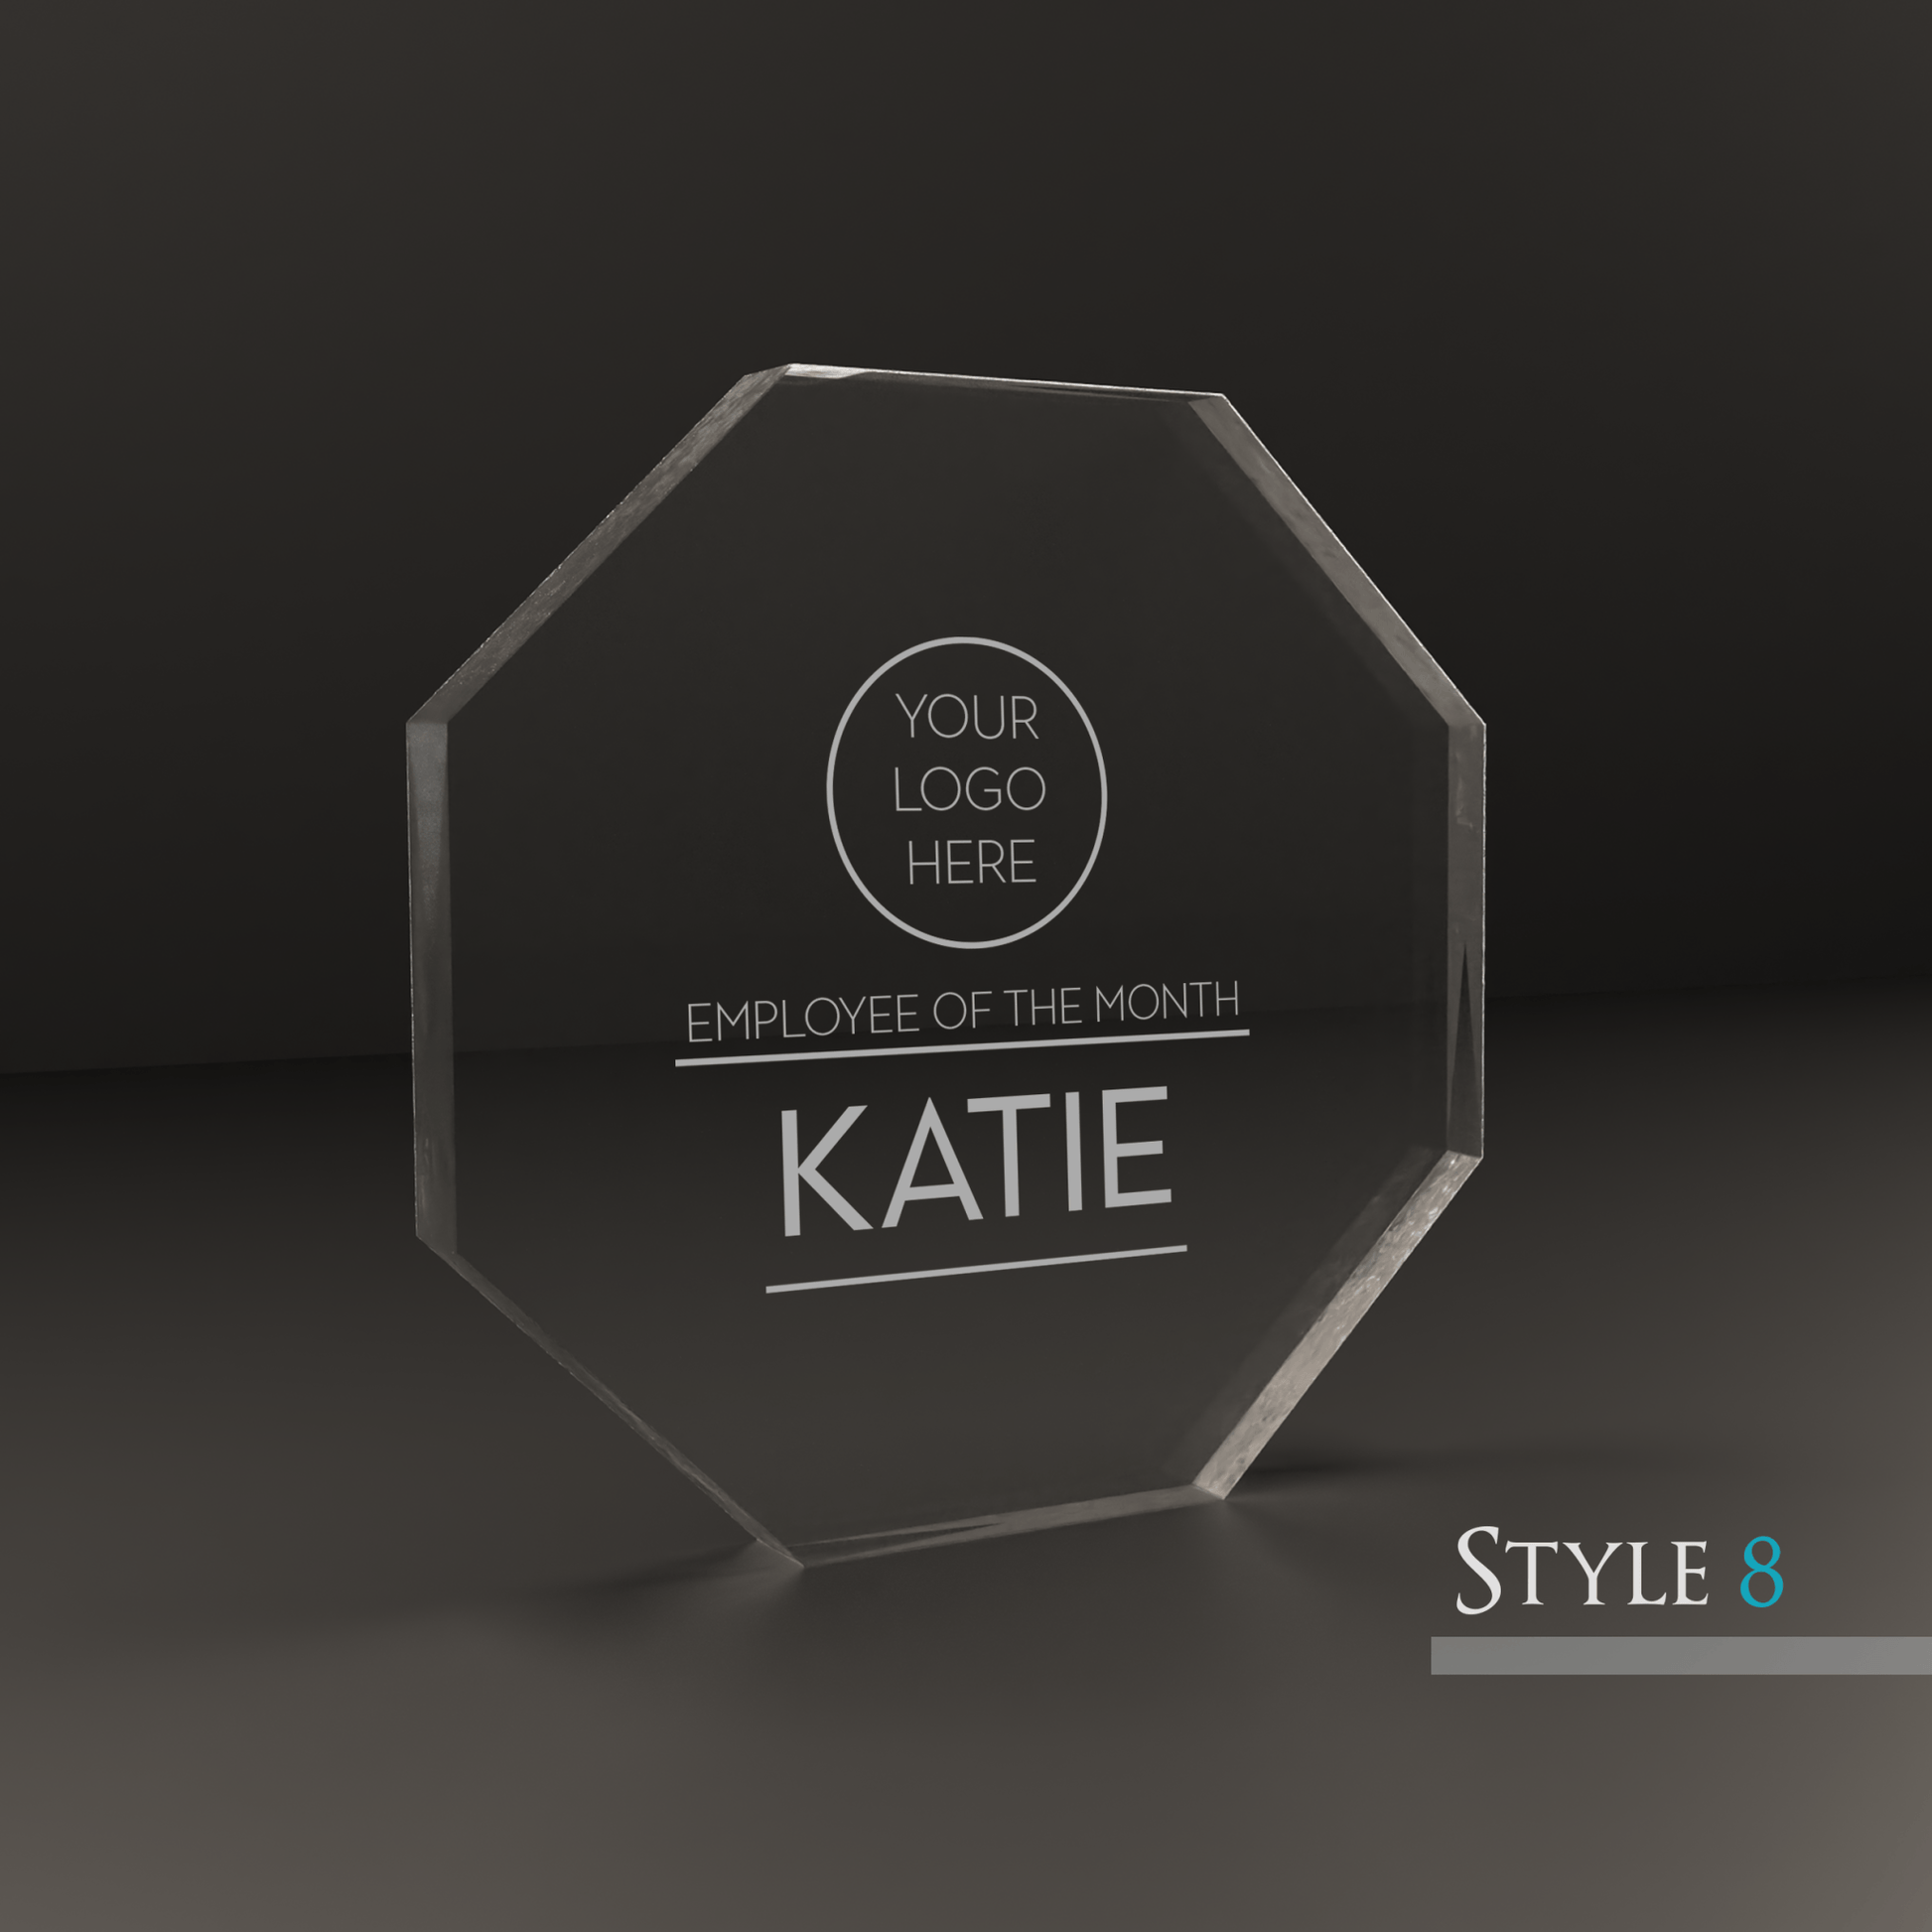 Personalised Engraved Octagon Glass Award Trophy - So Bespoke Gifts